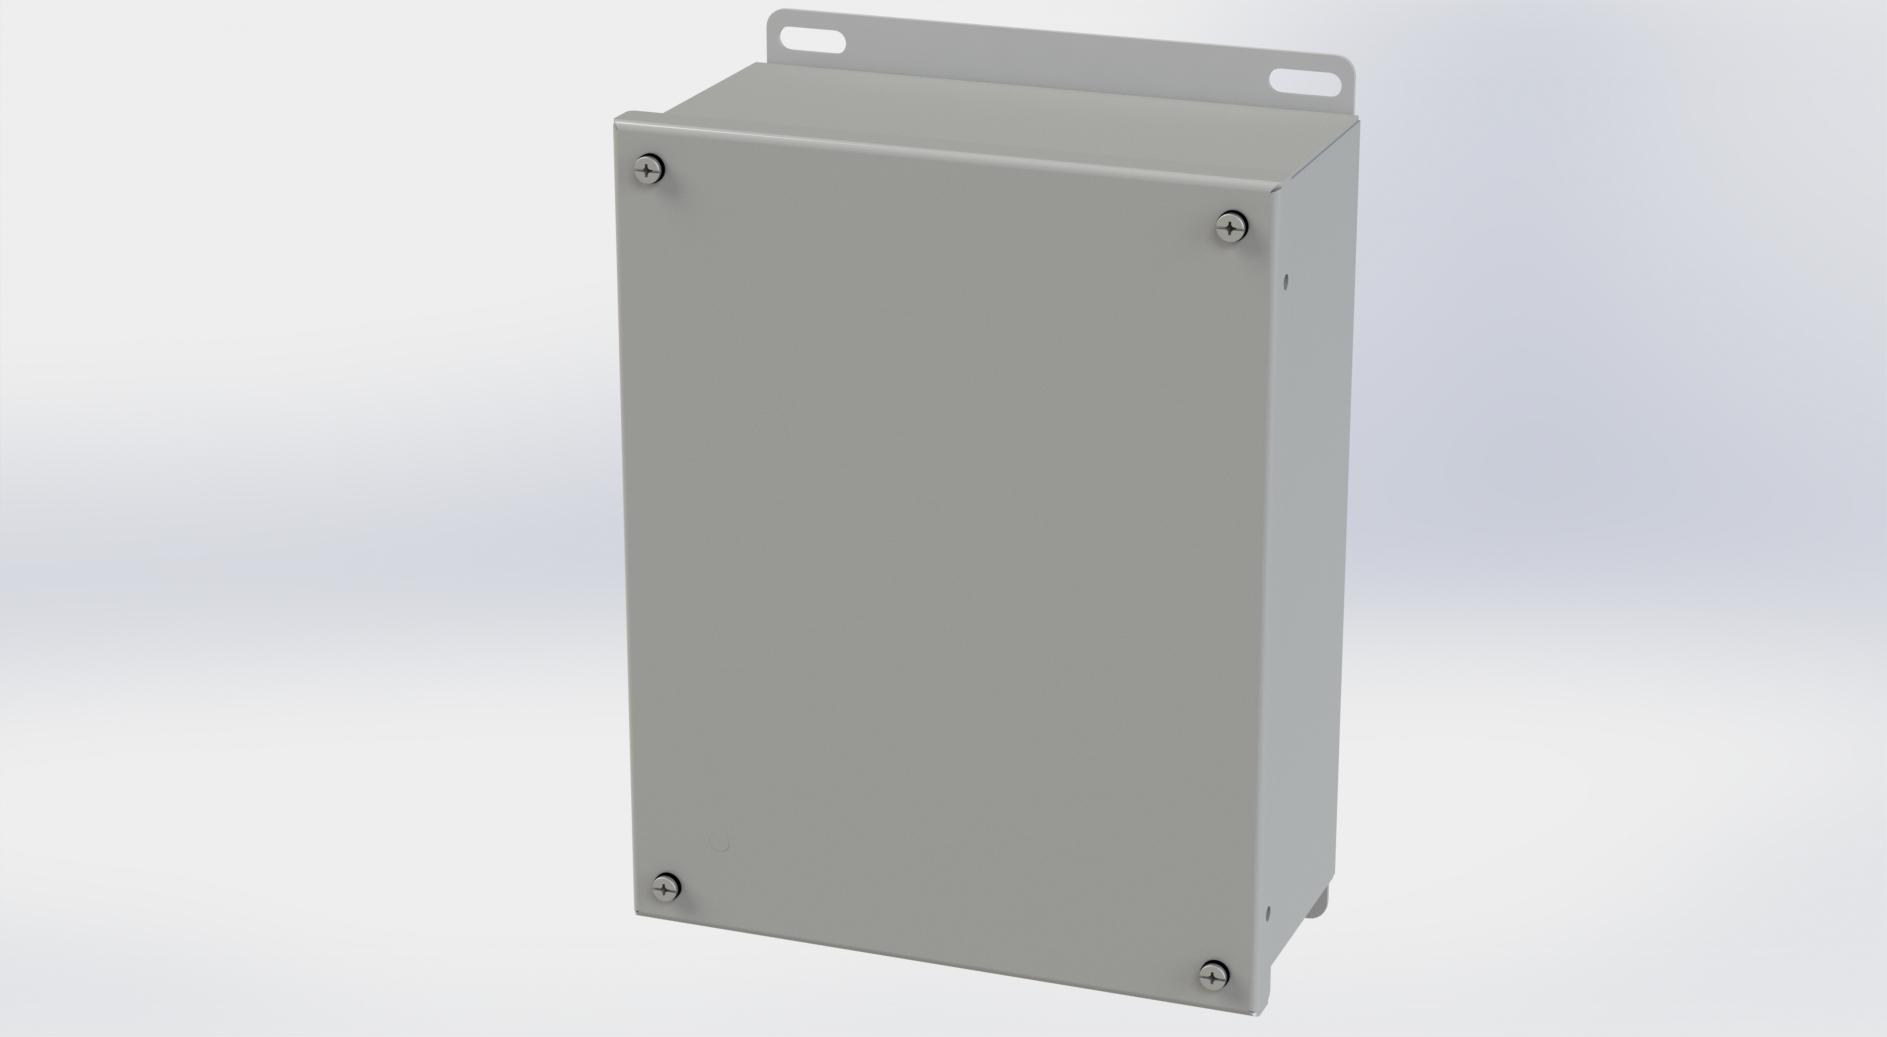 Saginaw Control SCE-1008SC SC Enclosure, Height:10.13", Width:8.00", Depth:4.00", ANSI-61 gray powder coating inside and out.  Optional sub-panels are powder coated white.